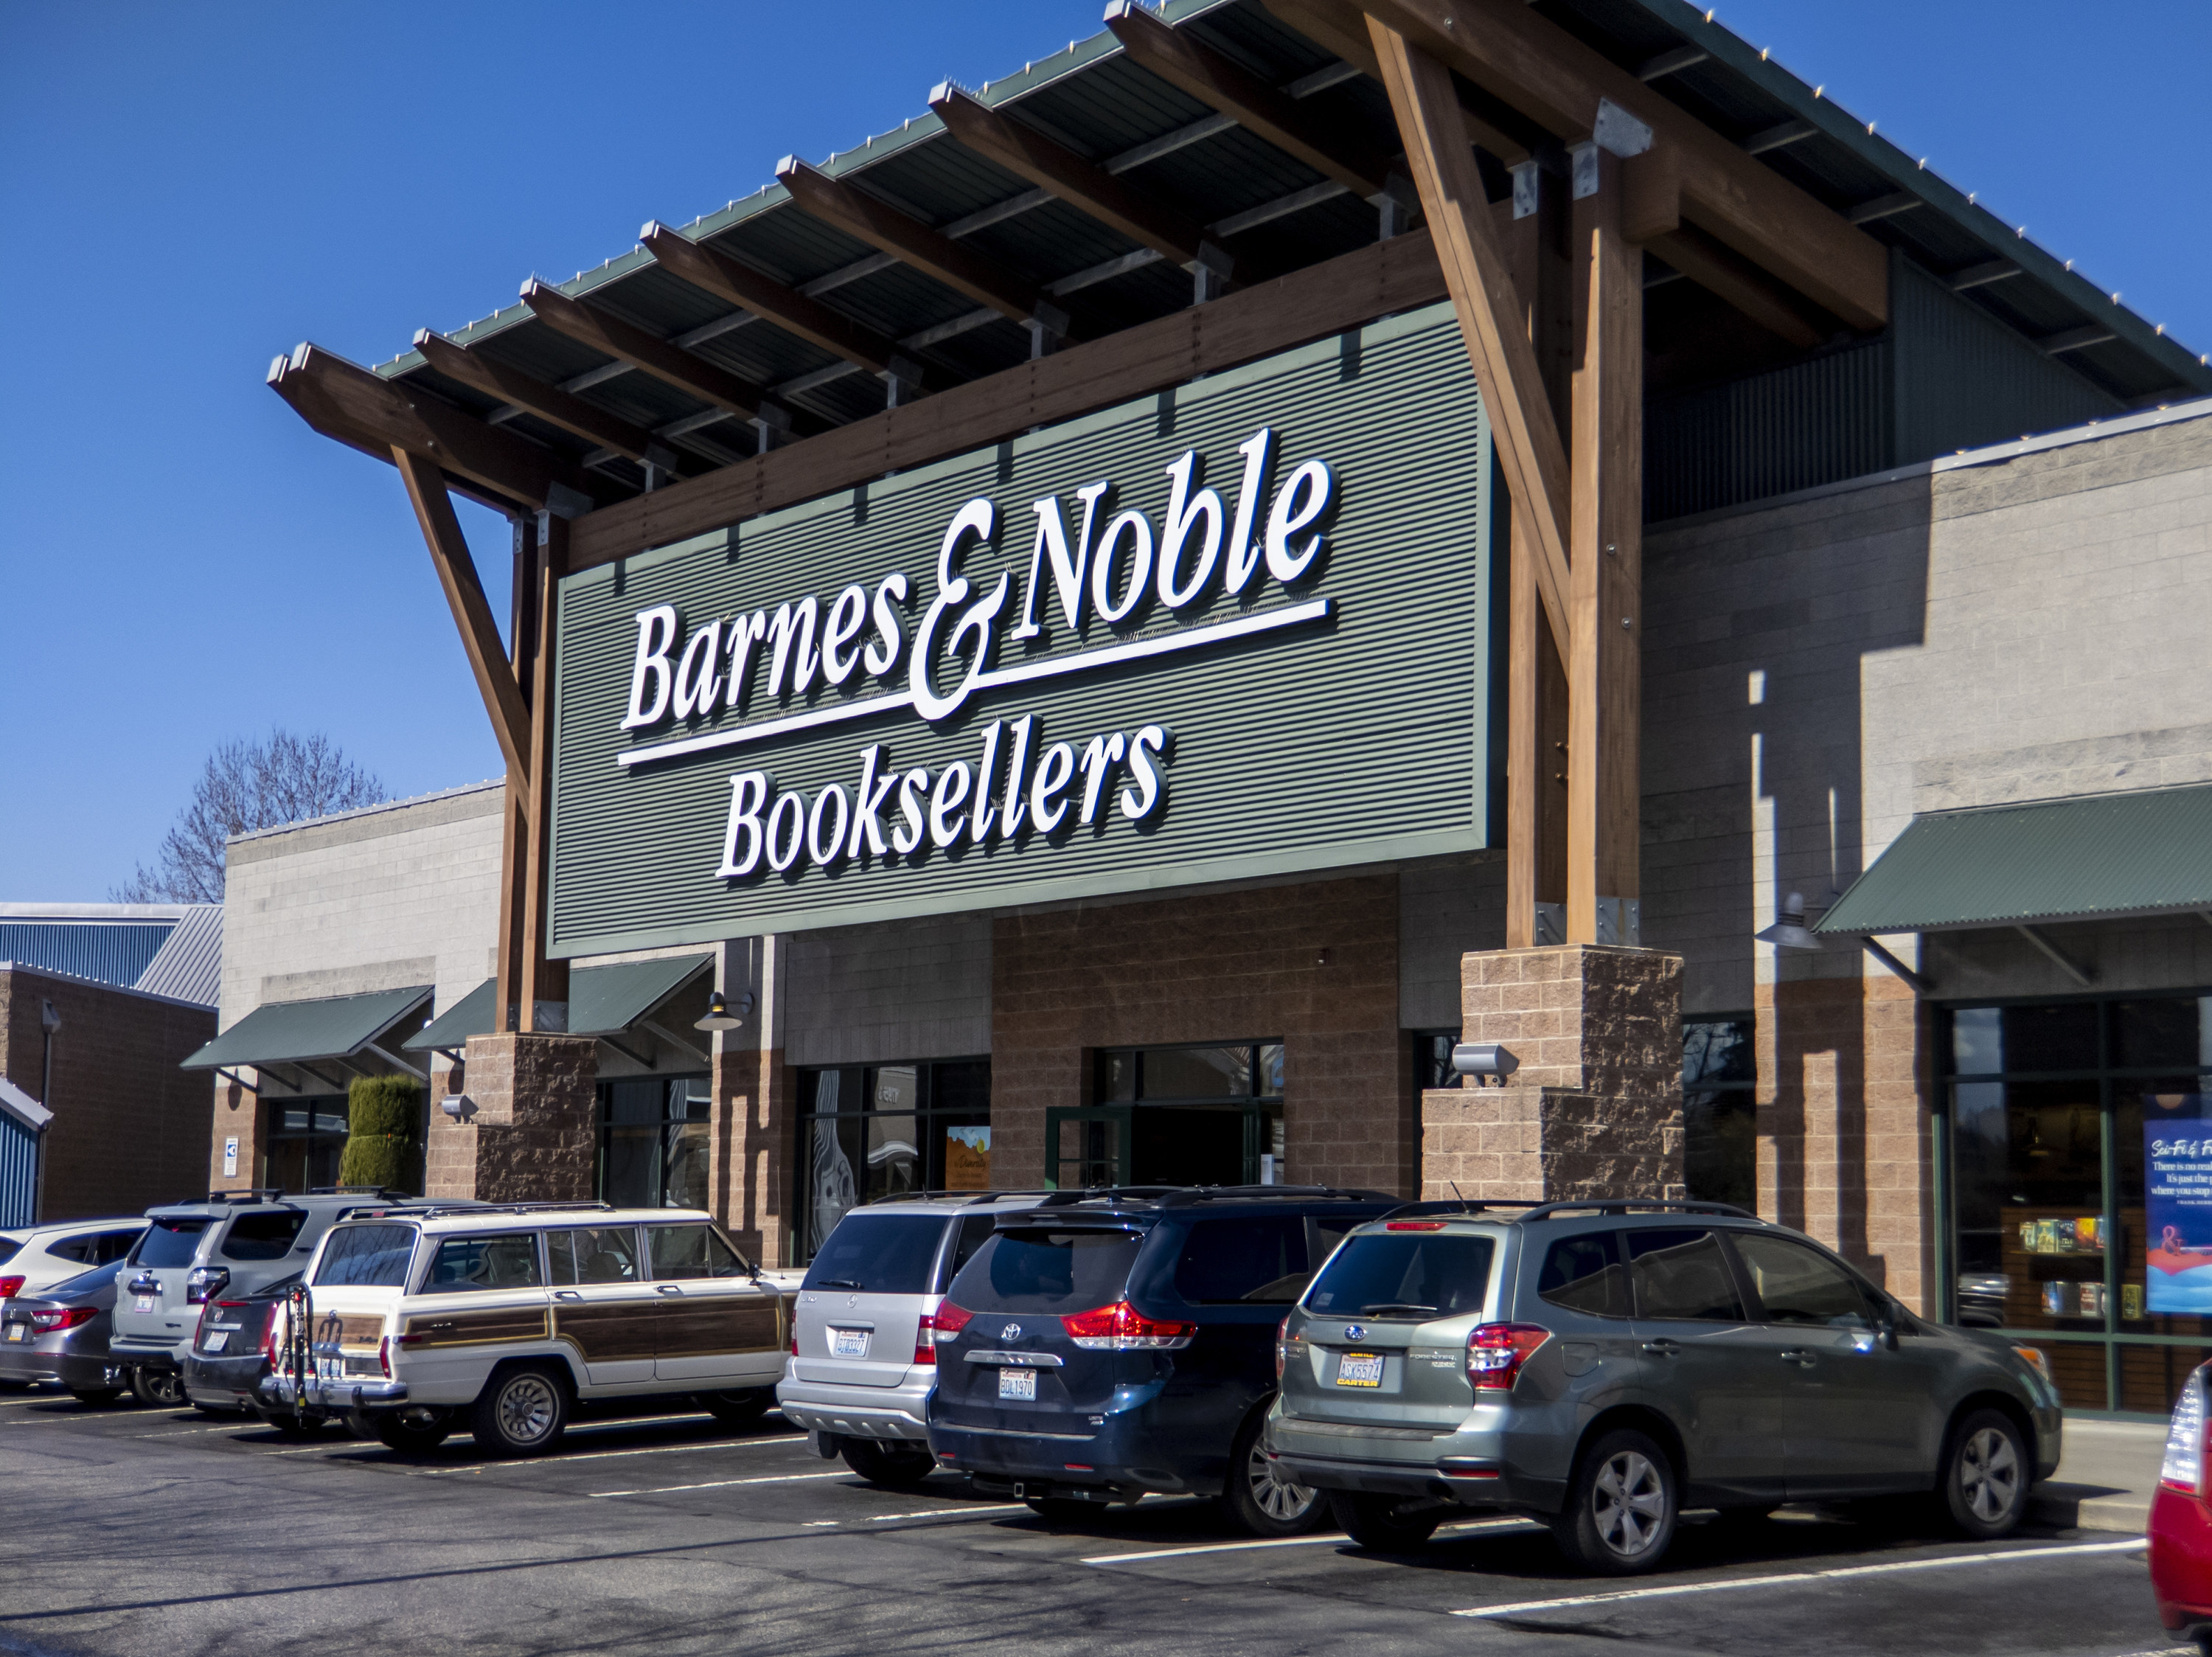 View of a Barnes and Noble storefront on a sunny day